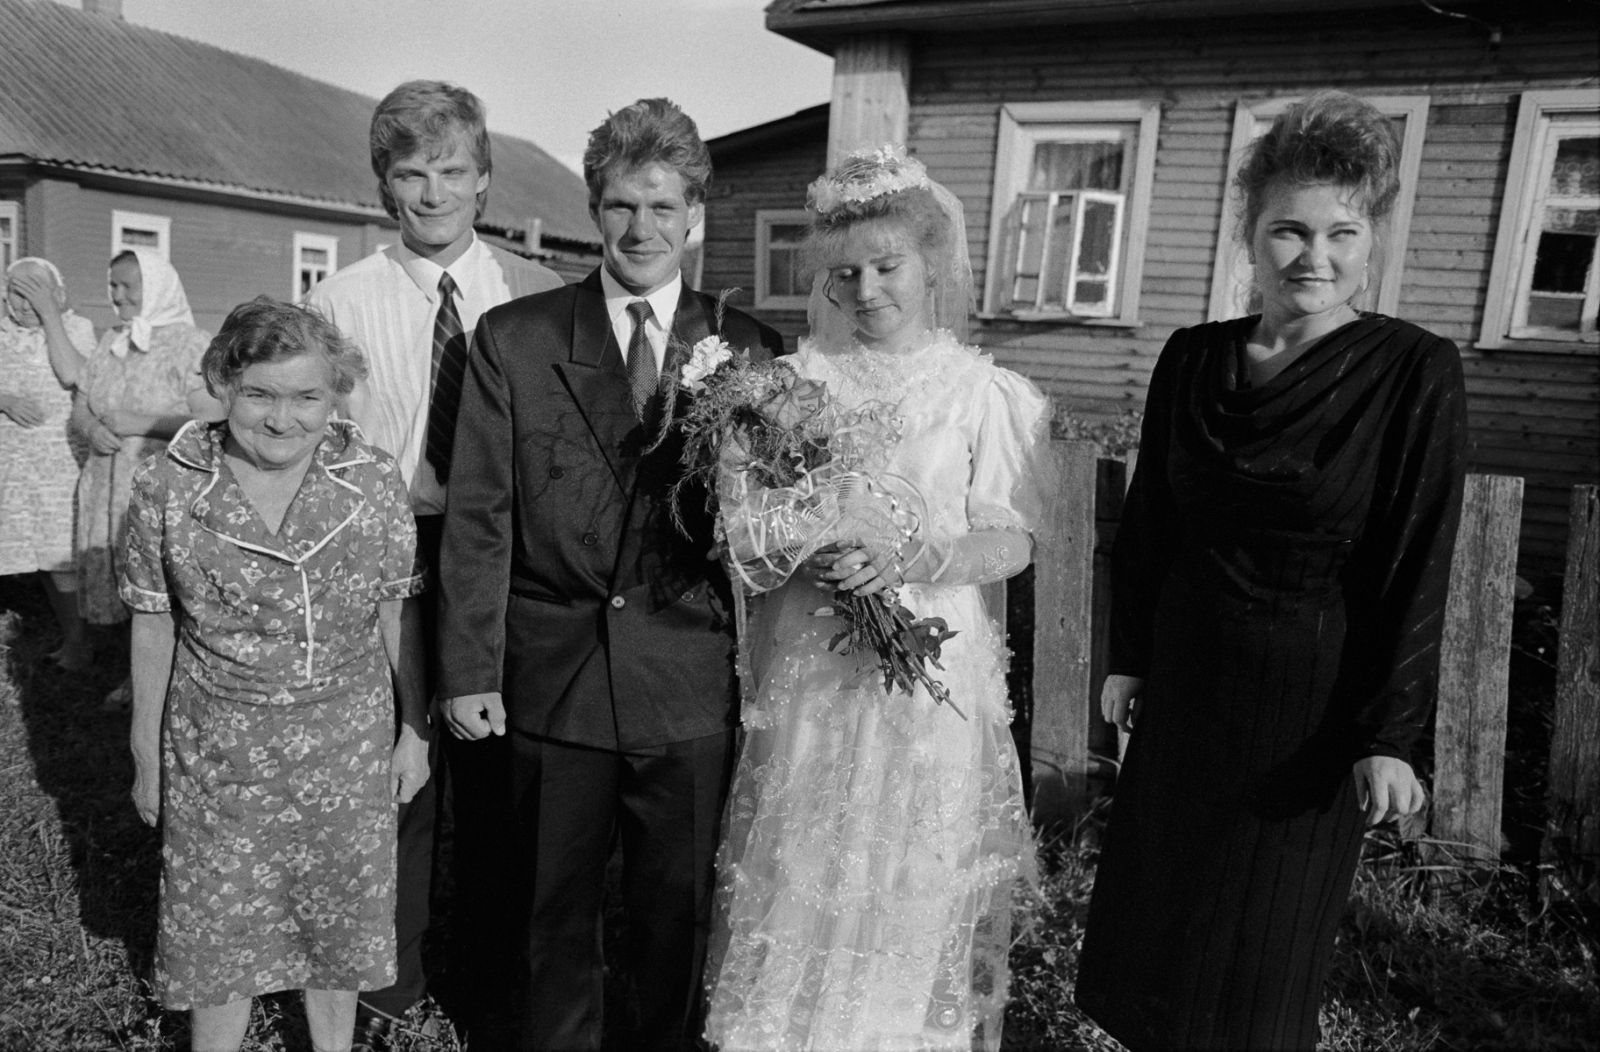 Russia - The Village of Anufrievo - Family members pose with the wedding couple.